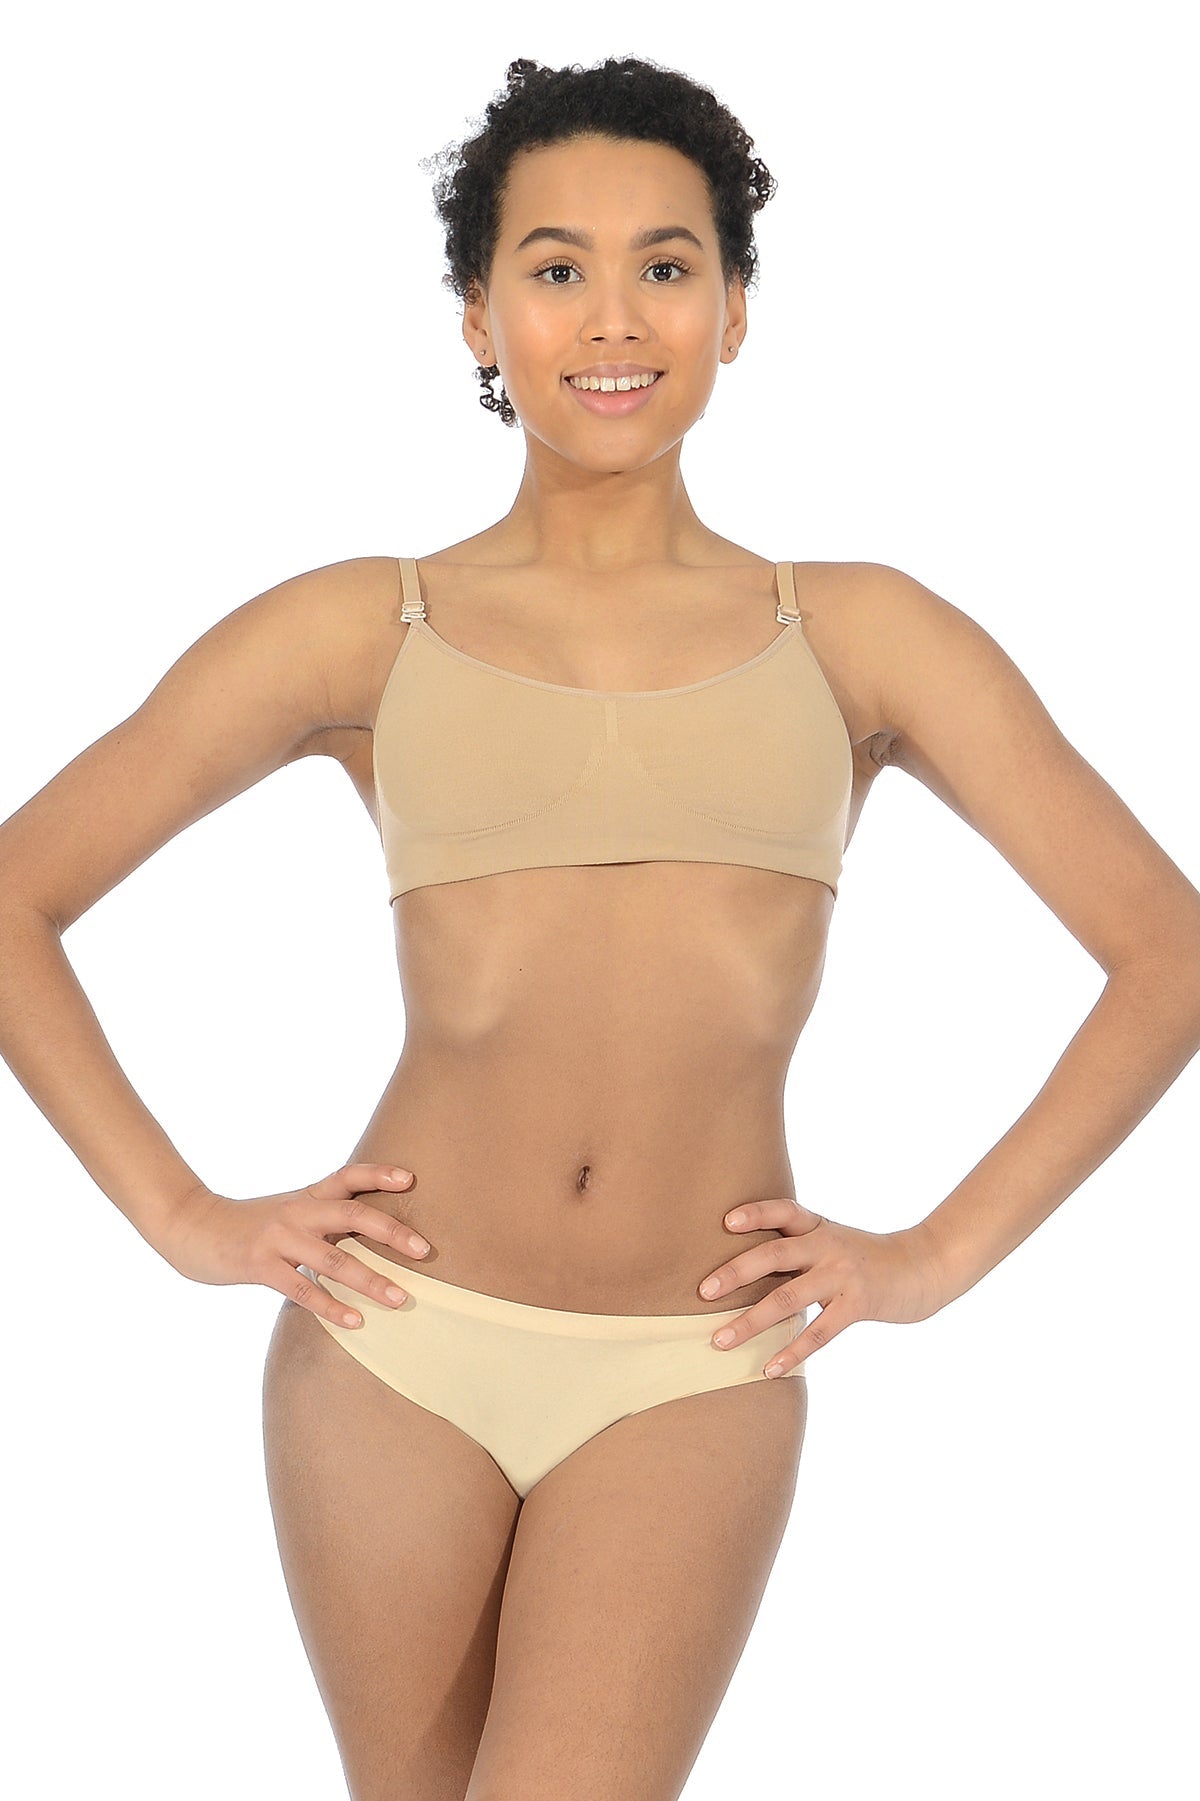 NEW Dance BRA Top Size CHILD MEDIUM Nude Clear Back & Straps